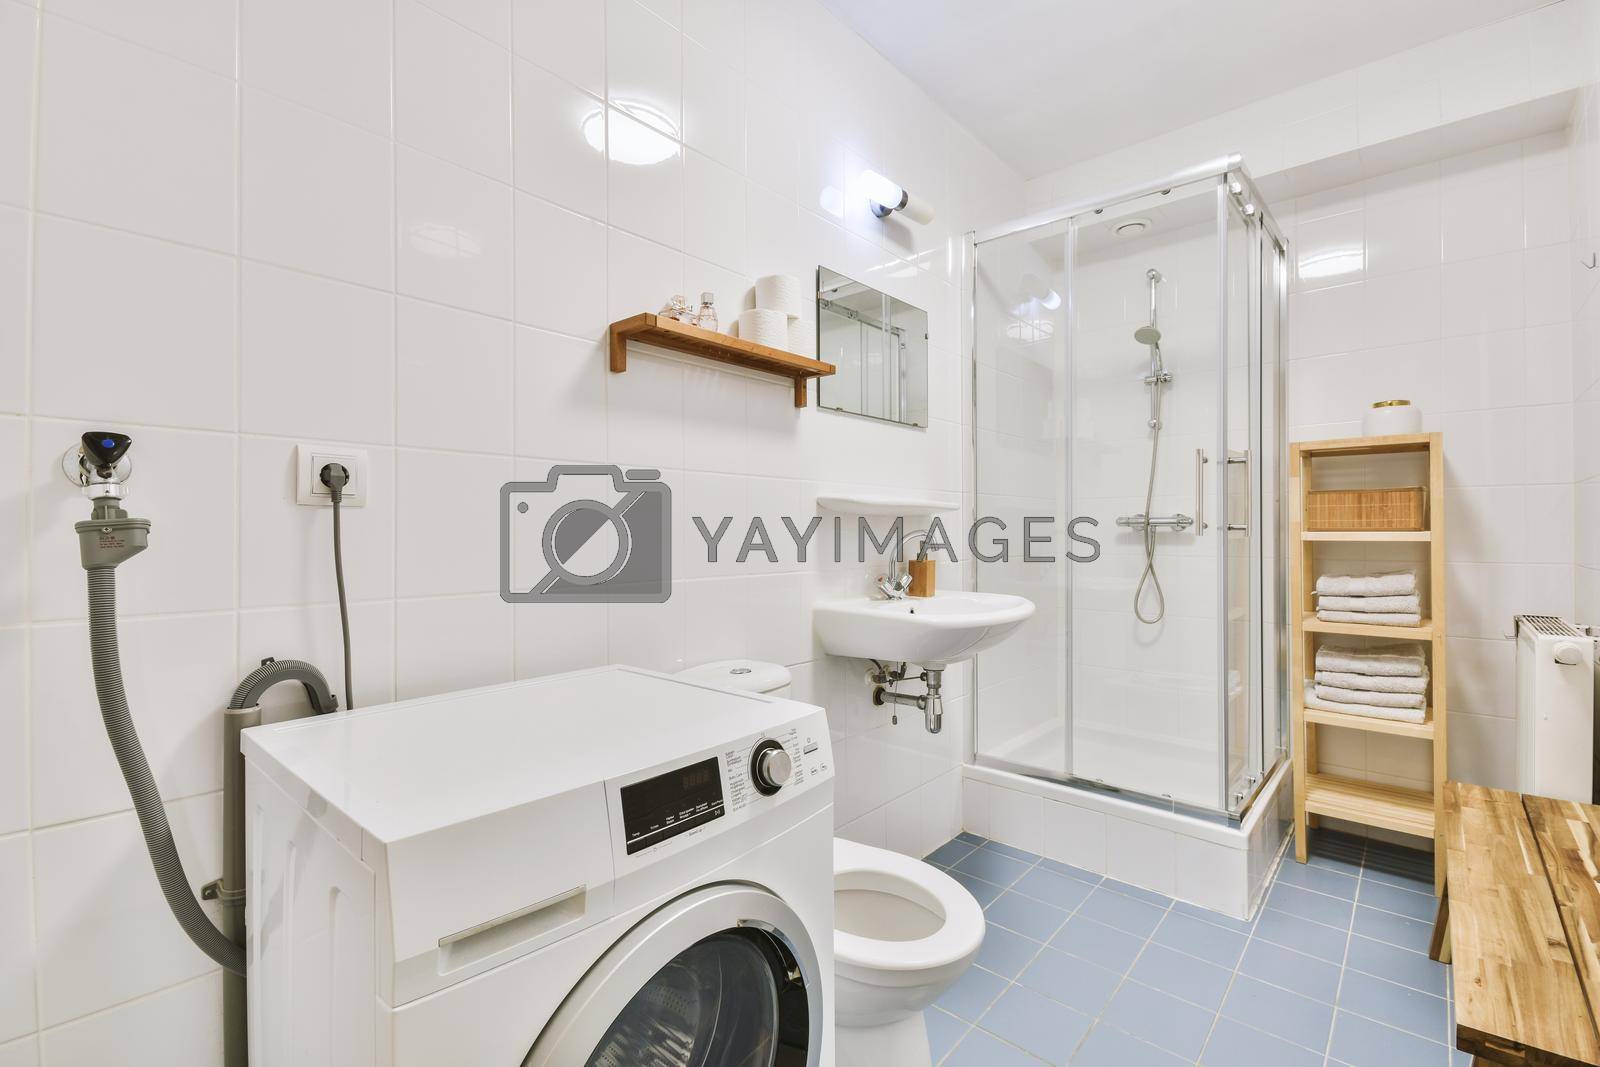 Royalty free image of Interior of a bathroom by casamedia